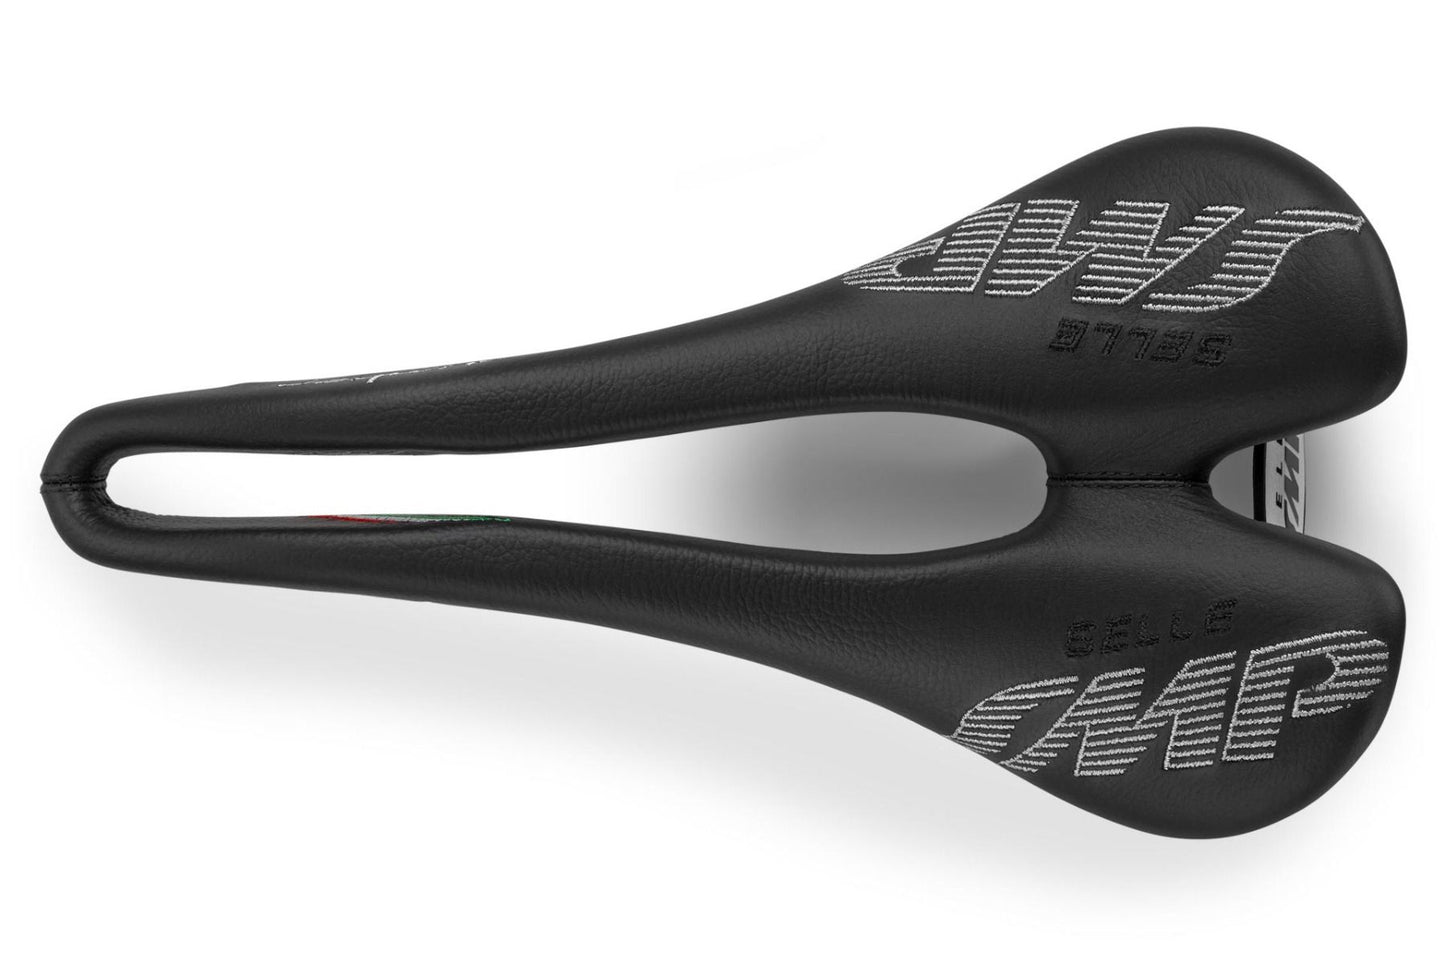 Selle SMP Nymber Saddle with Carbon Rails (Black)